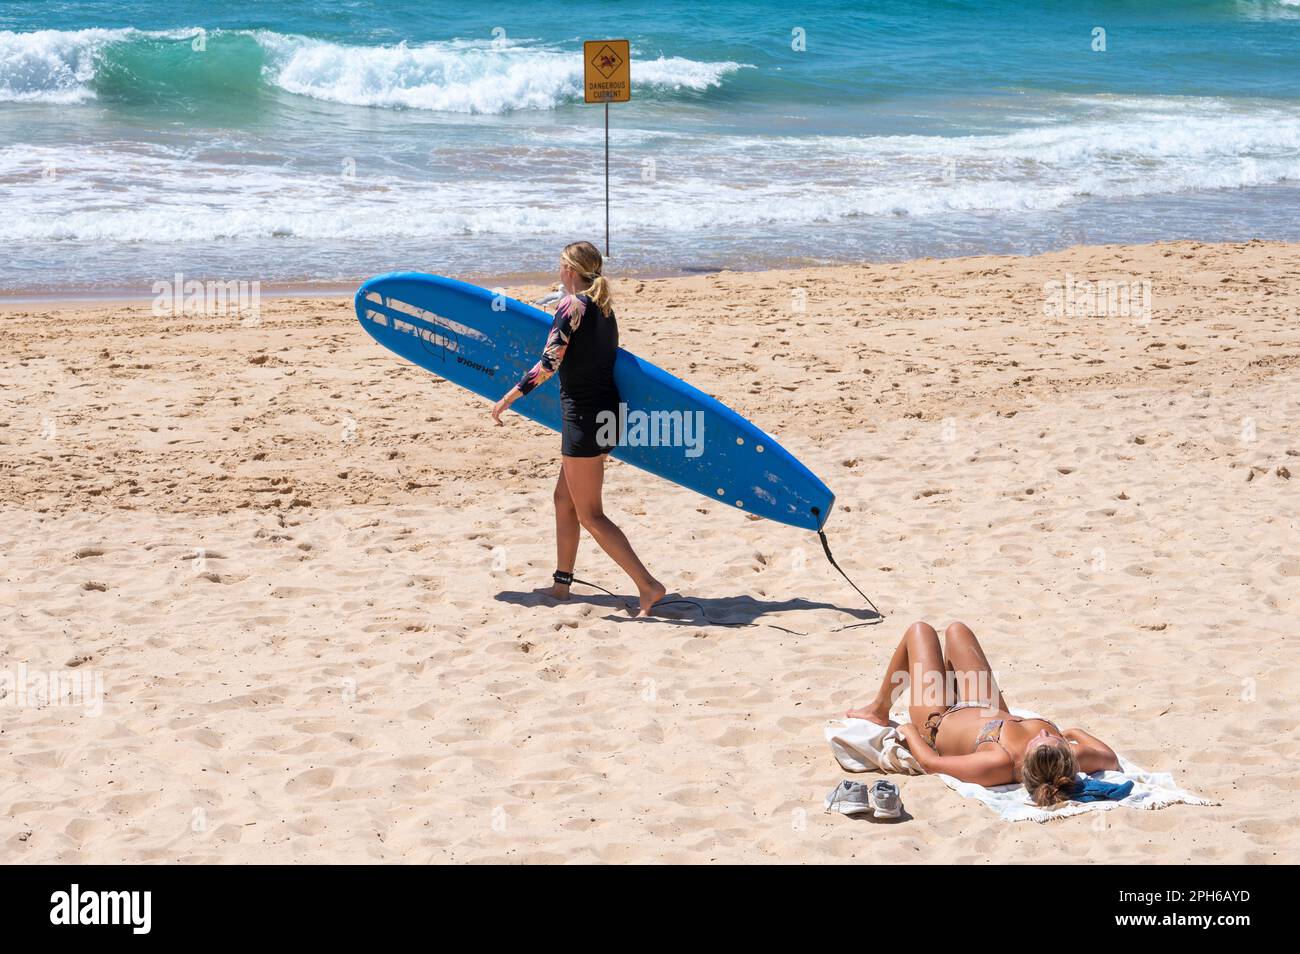 As a sun bather soaks up the rays, a surfer carries her board along the beach at Manly, Sydney, New South Wales, Australia against a backdrop of the b Stock Photo